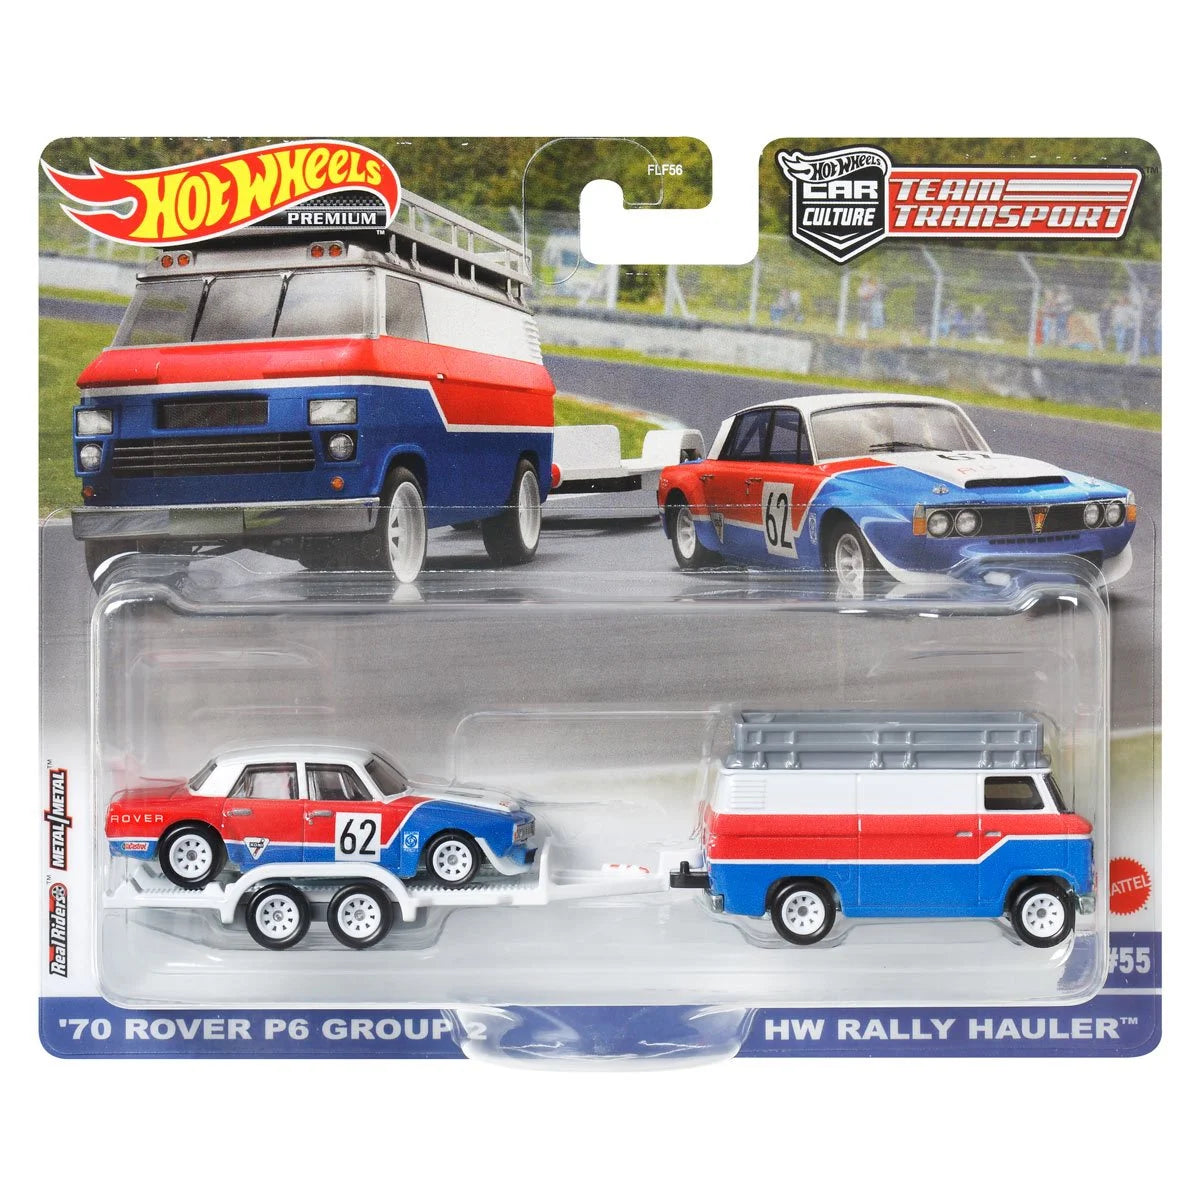 Hot Wheels Team Transport - ‘70 Rover P6 Group 2 with HW Rally Hauler